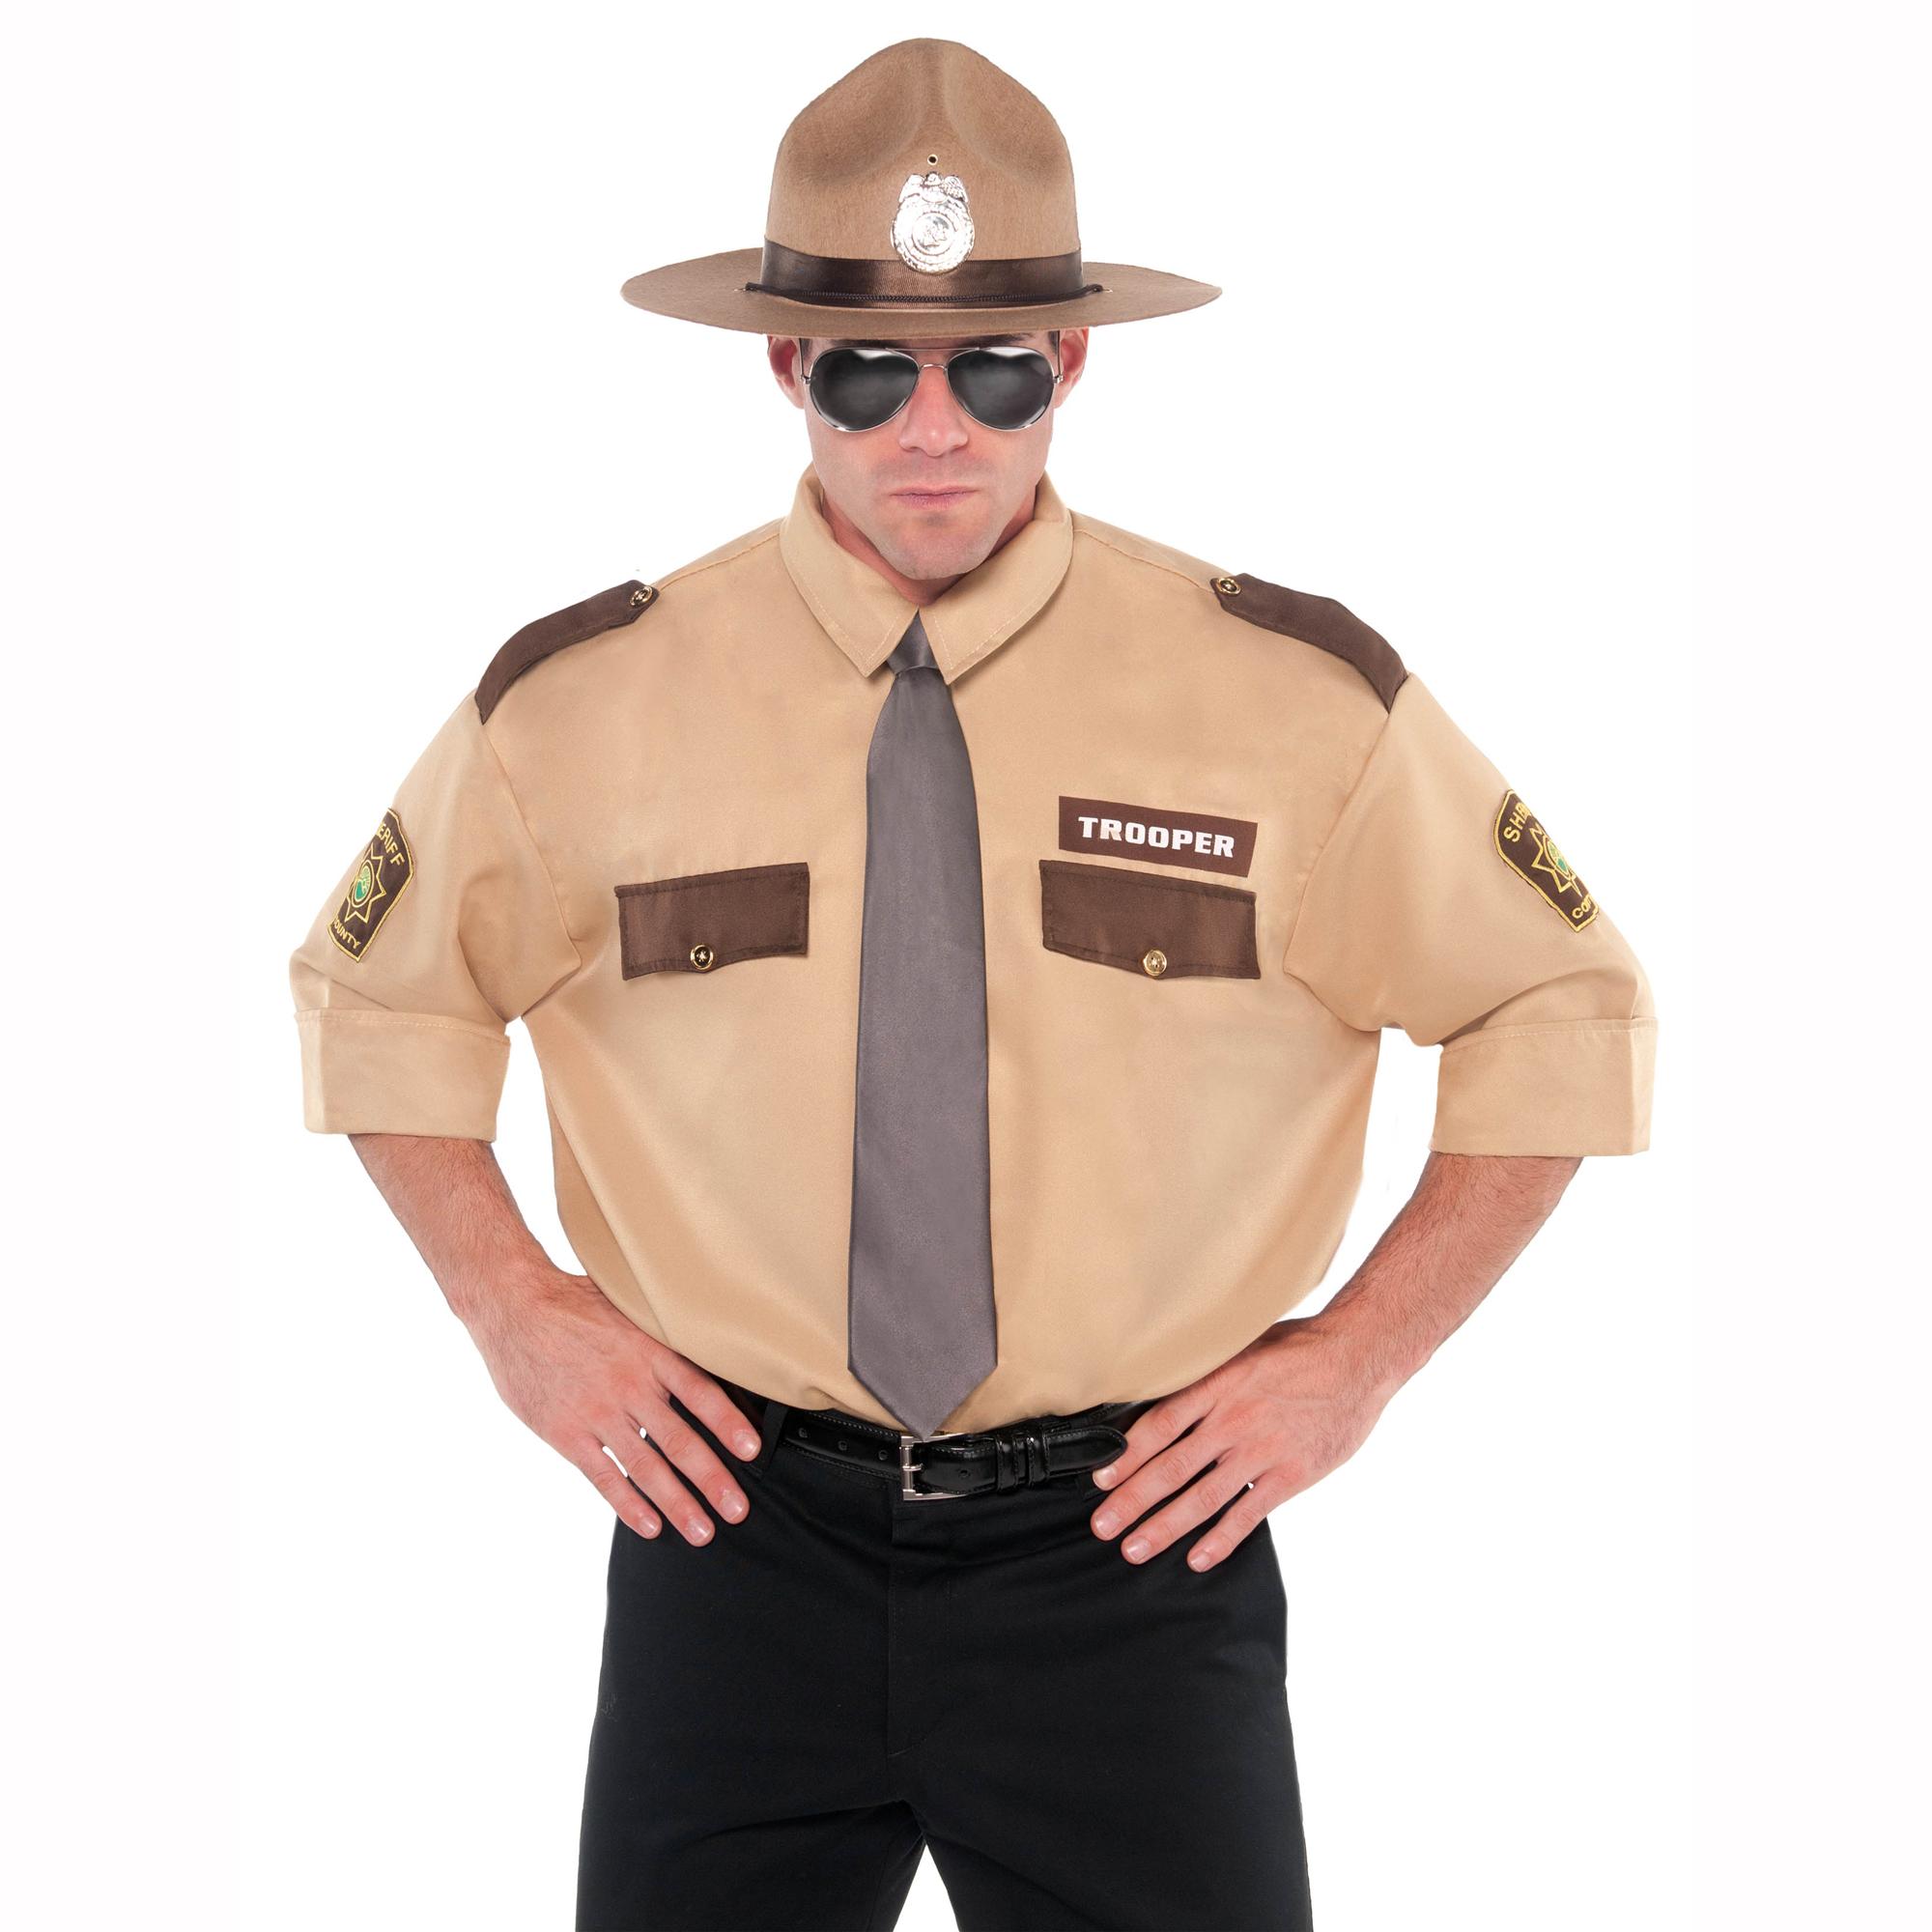 Sheriff Shirt Costumes & Apparel - Party Centre